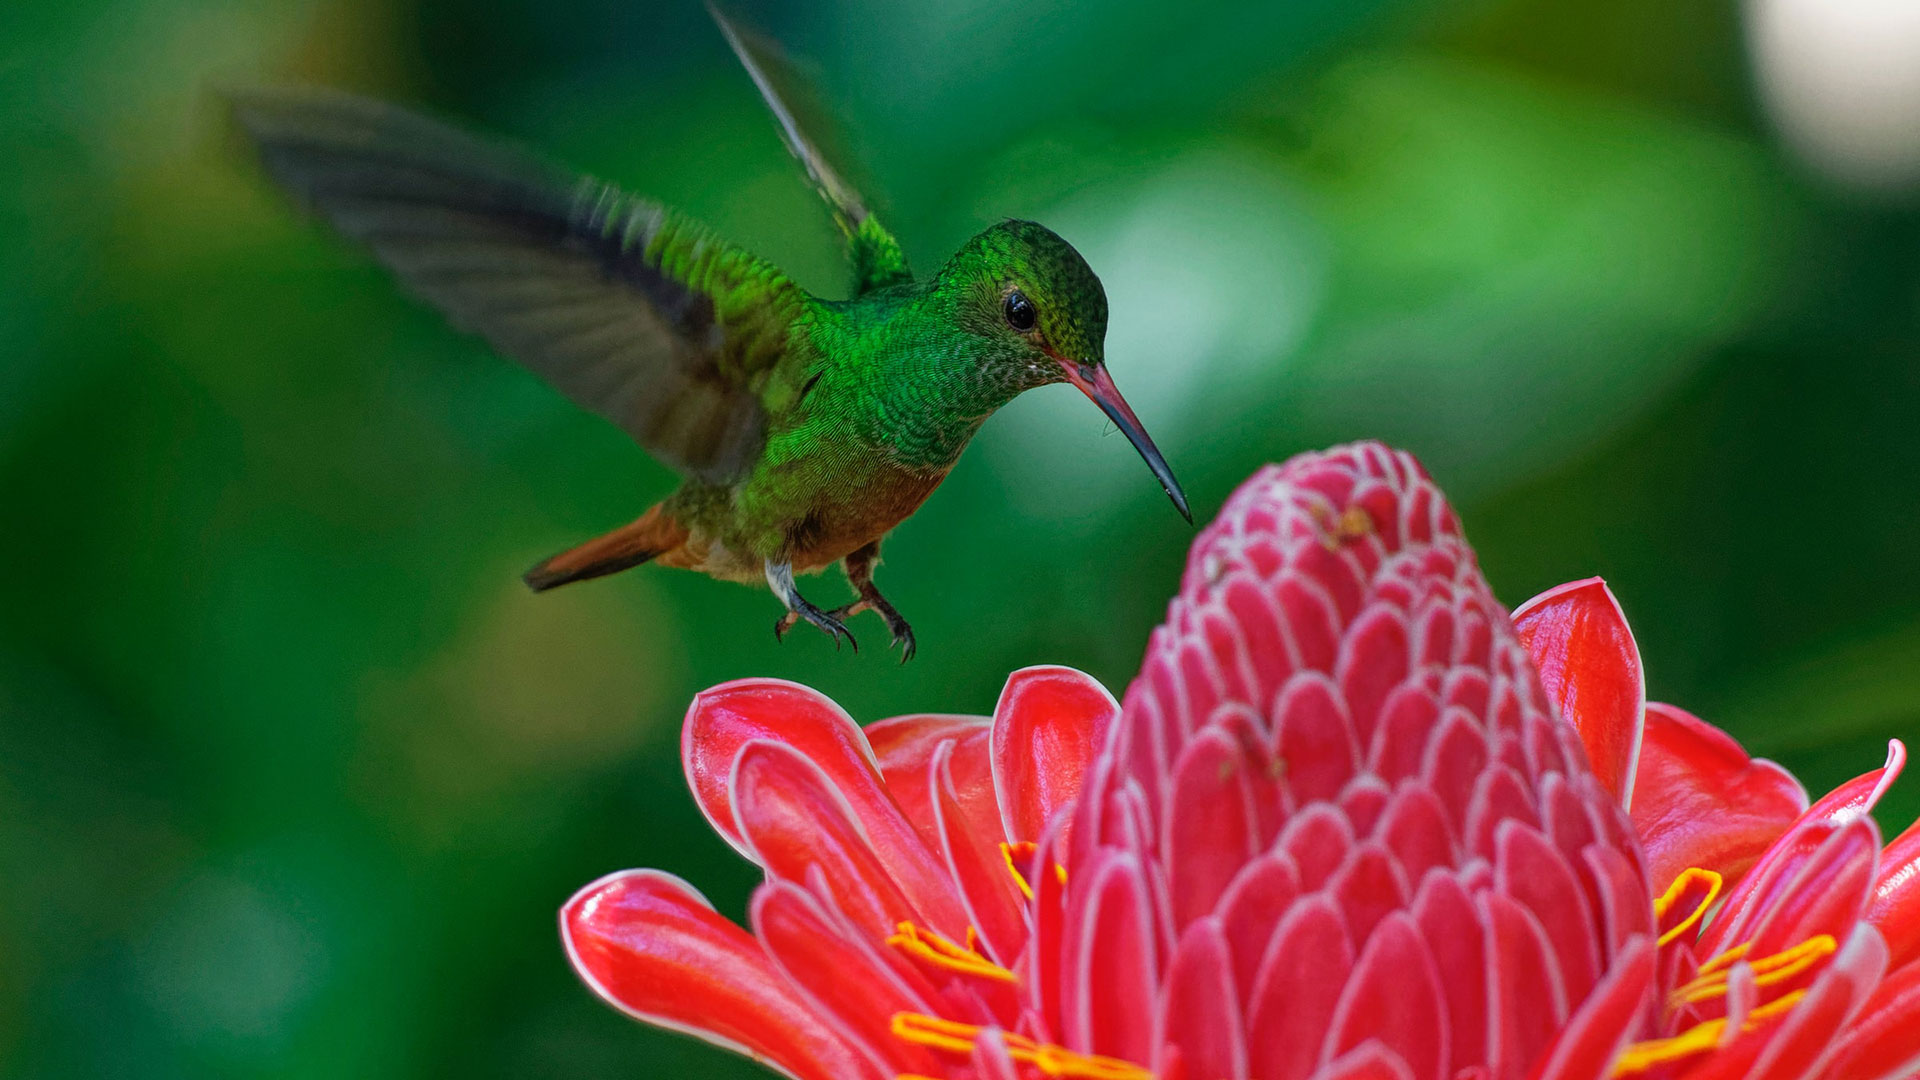 Hummingbird hovering above pink flower in rain forest, Costa Rica